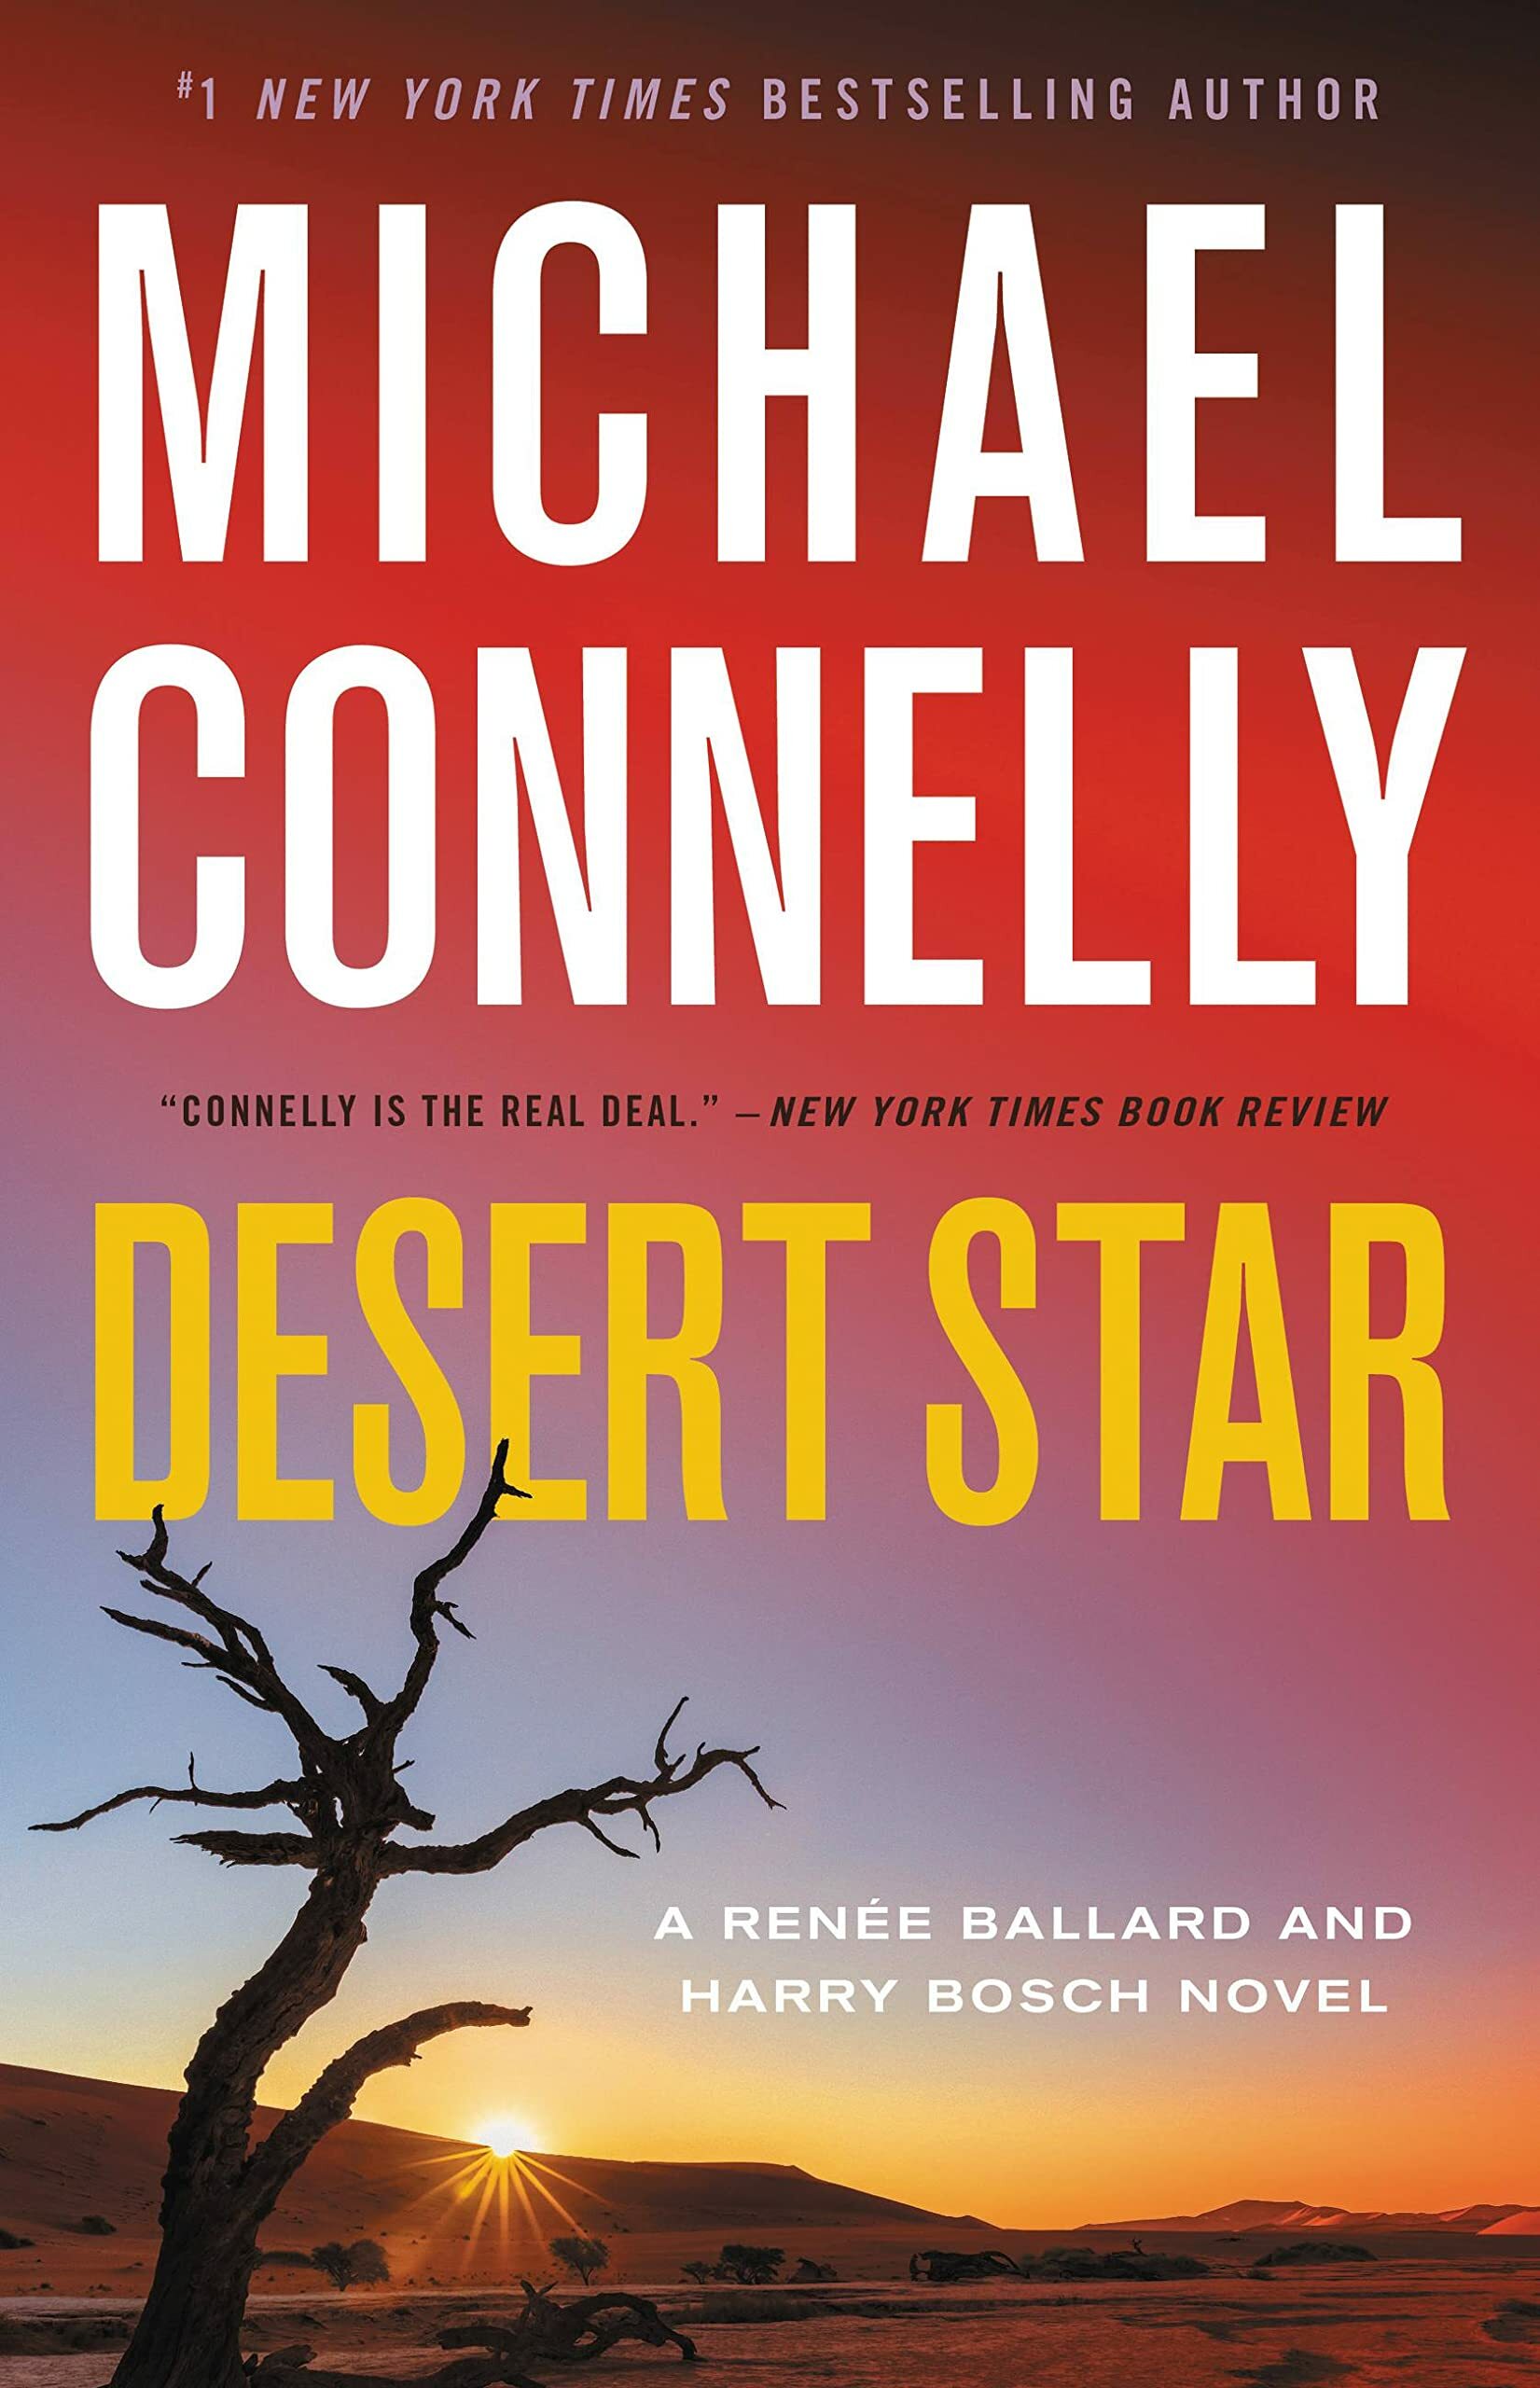 Michael Connelly's book 